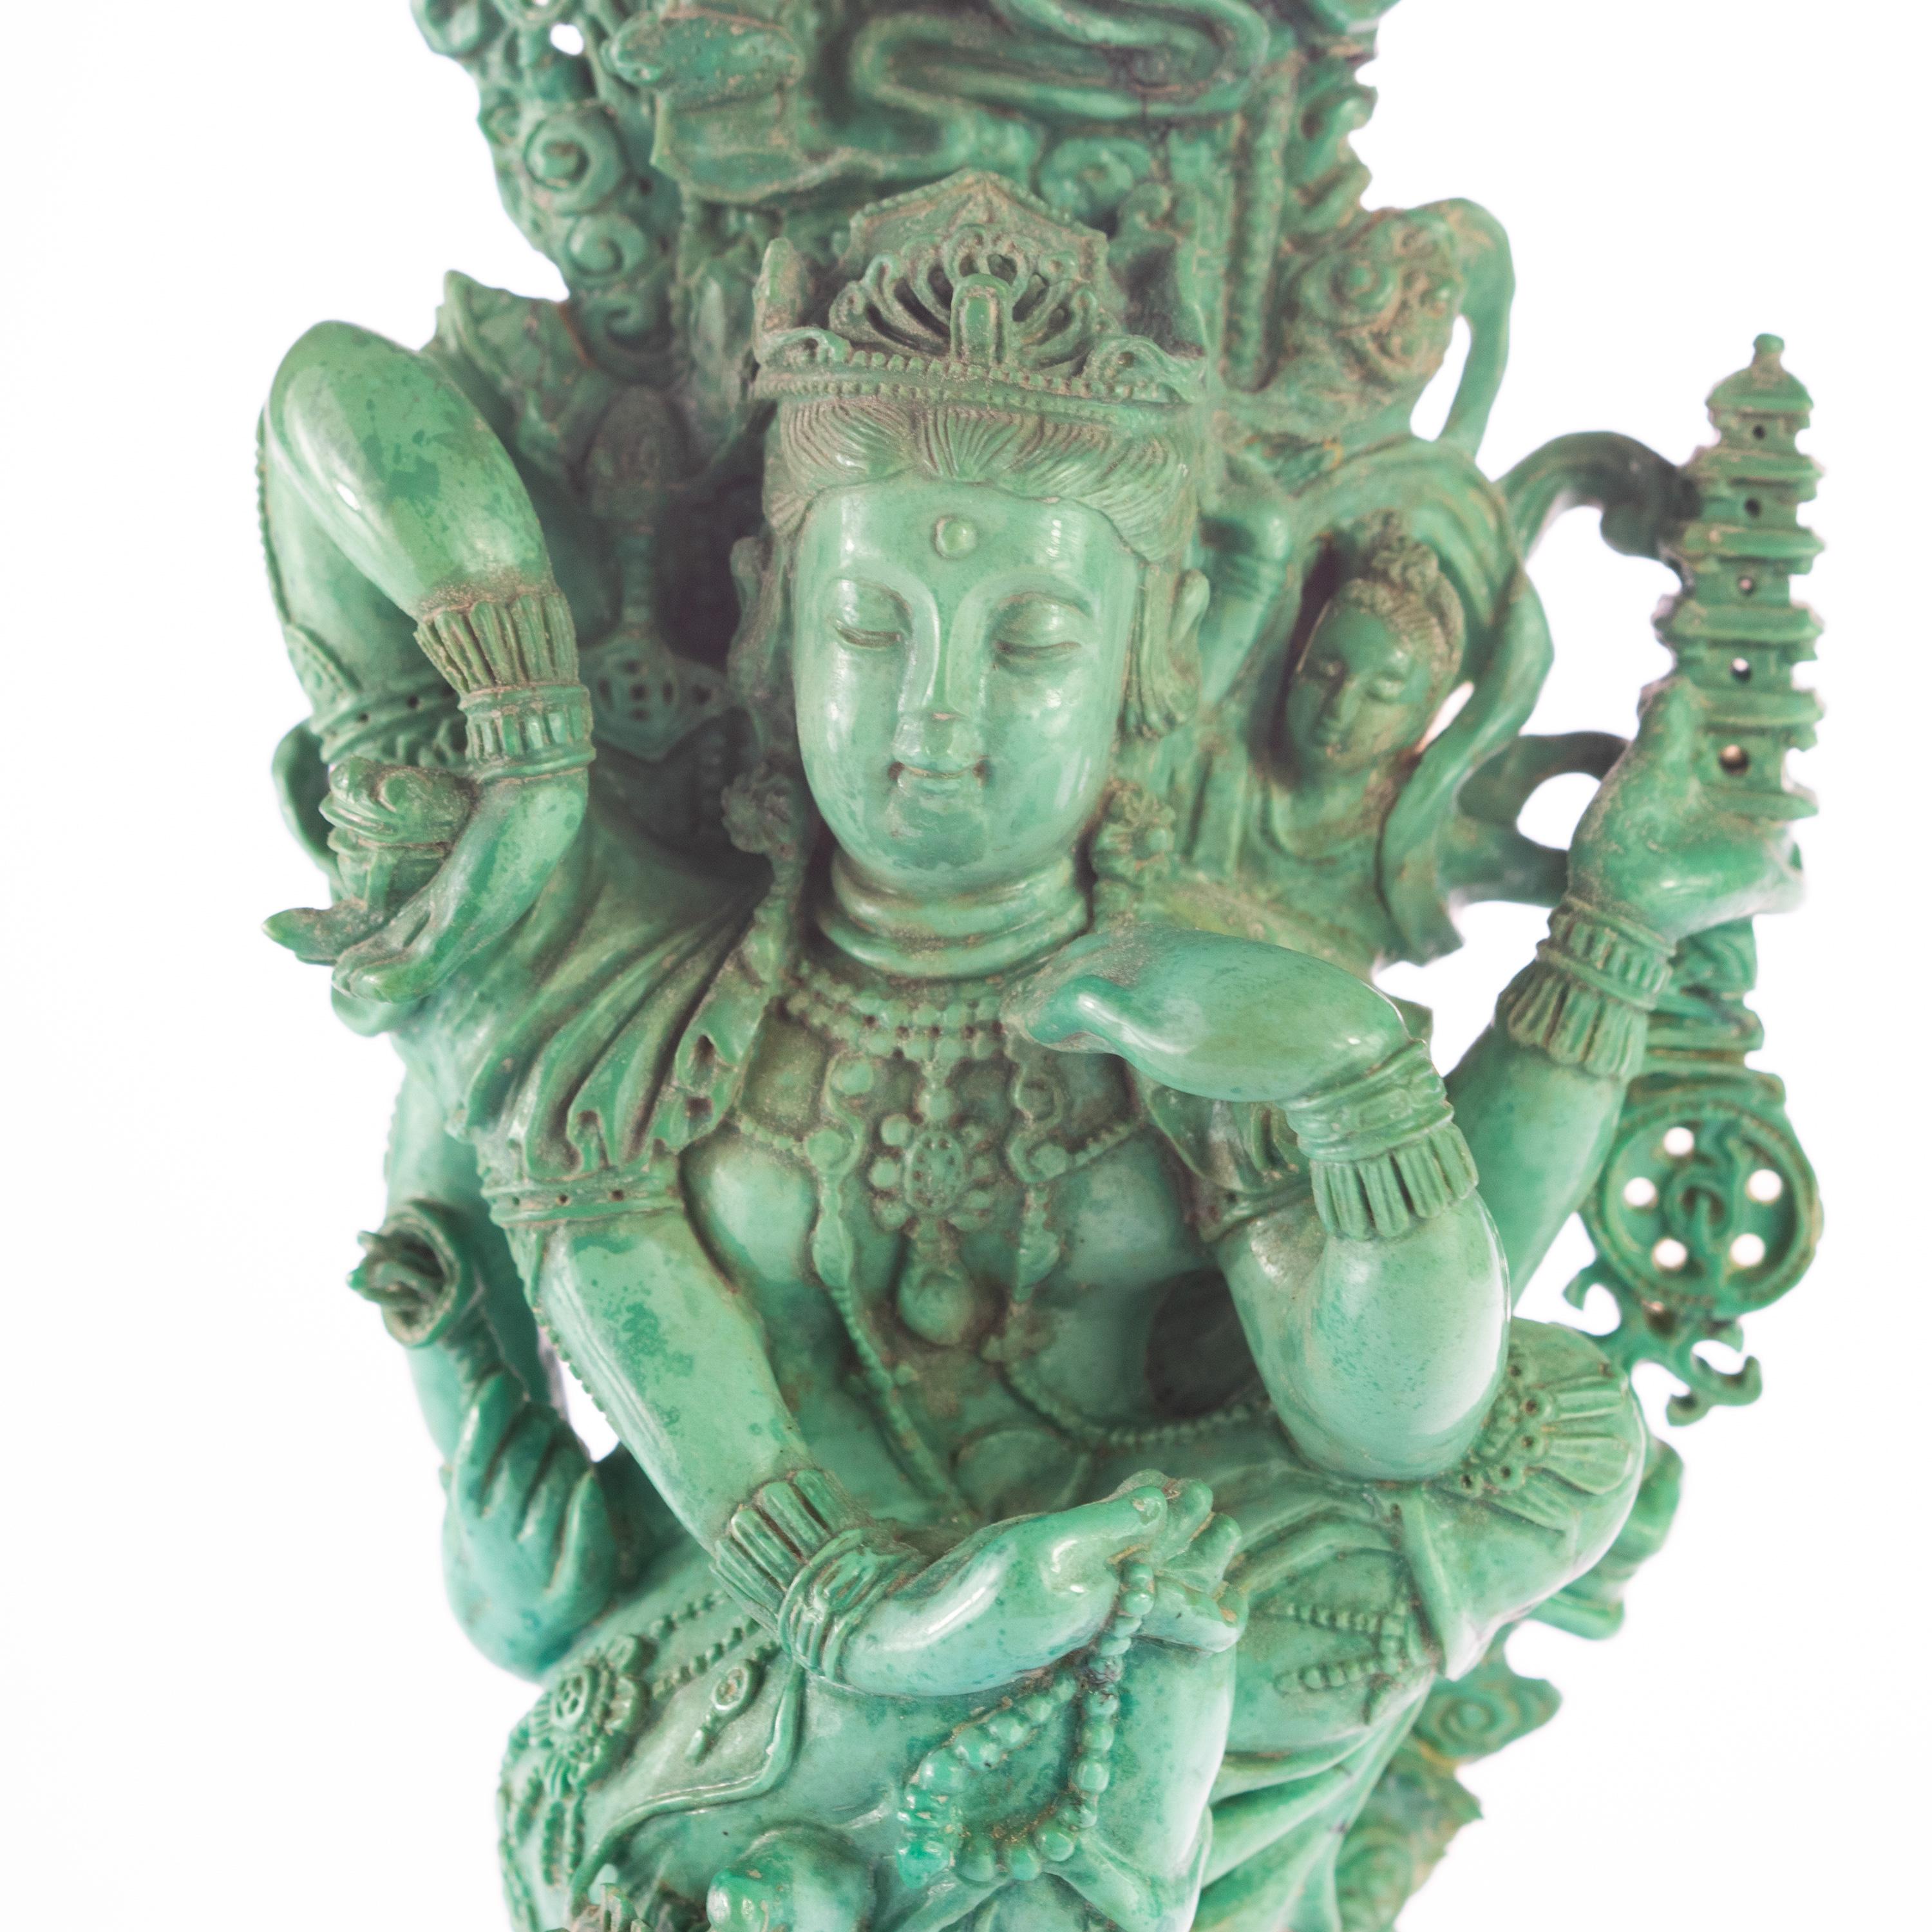 Late 20th Century Turquoise Guanyin Bodhisattva Female Buddha Asian Art Carved Statue Sculpture For Sale